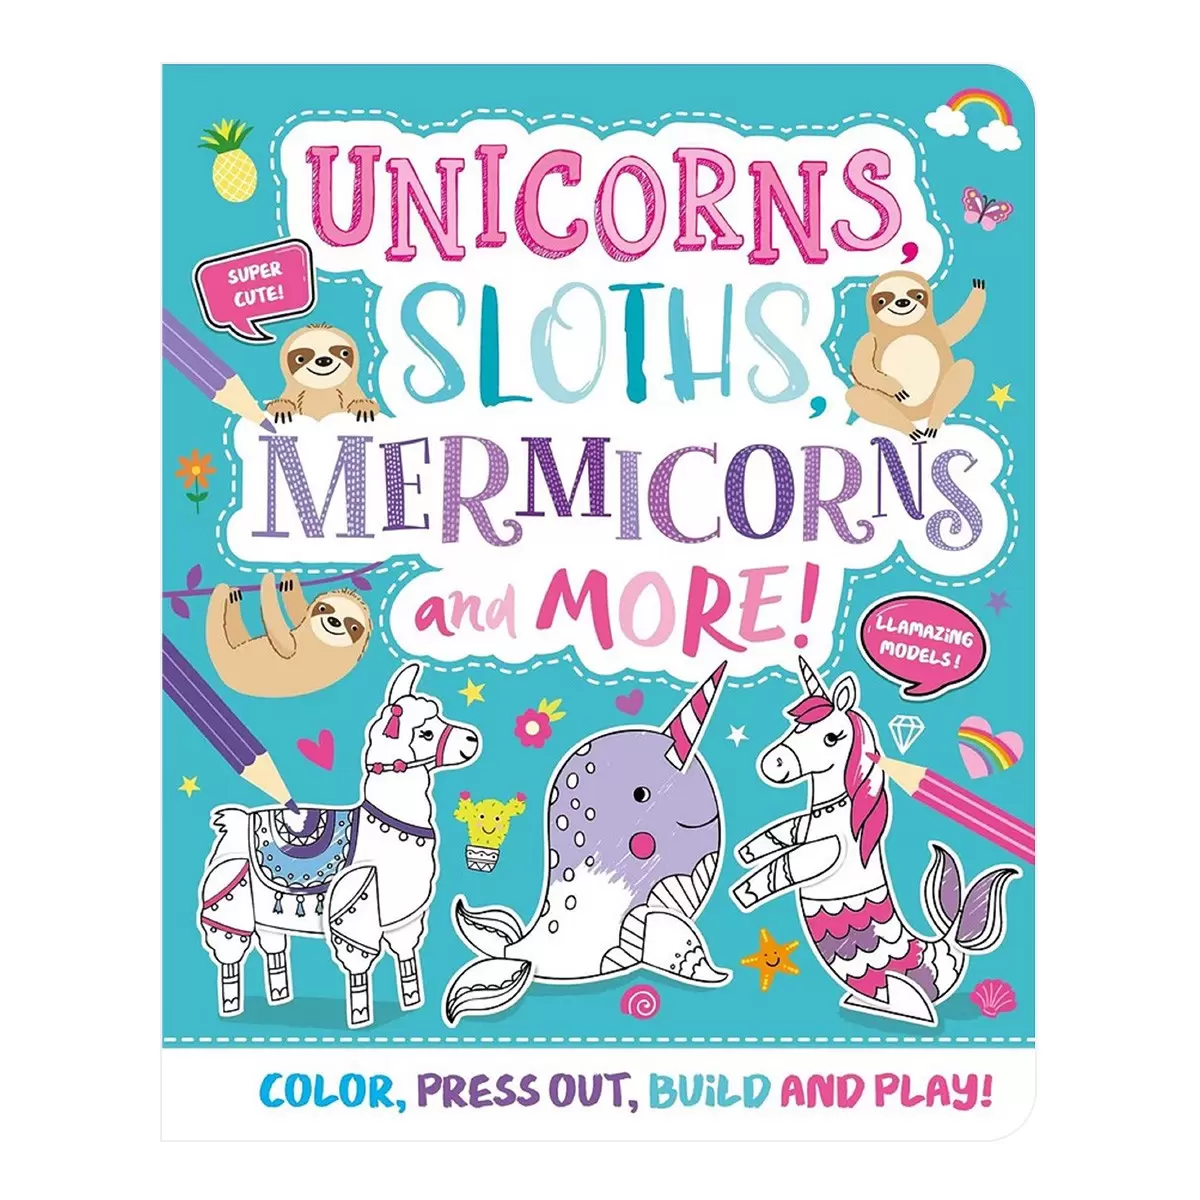 Press-Out and Build Model Book 外文遊戲書 Unicorns, Sloths, Mermicorns and More!